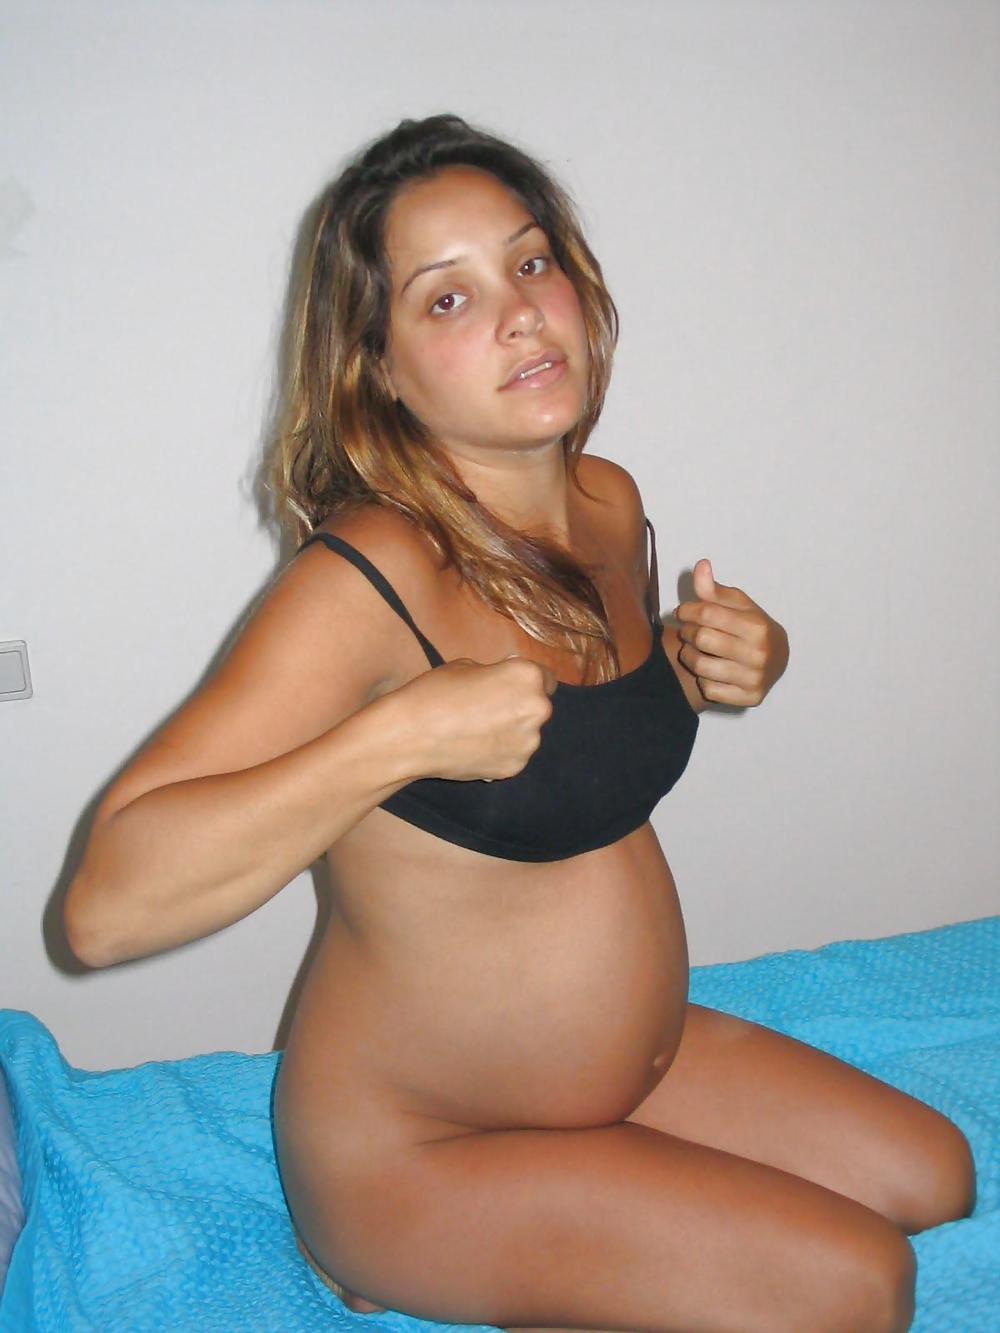 Highly pregnant naked messy full body fan compilation